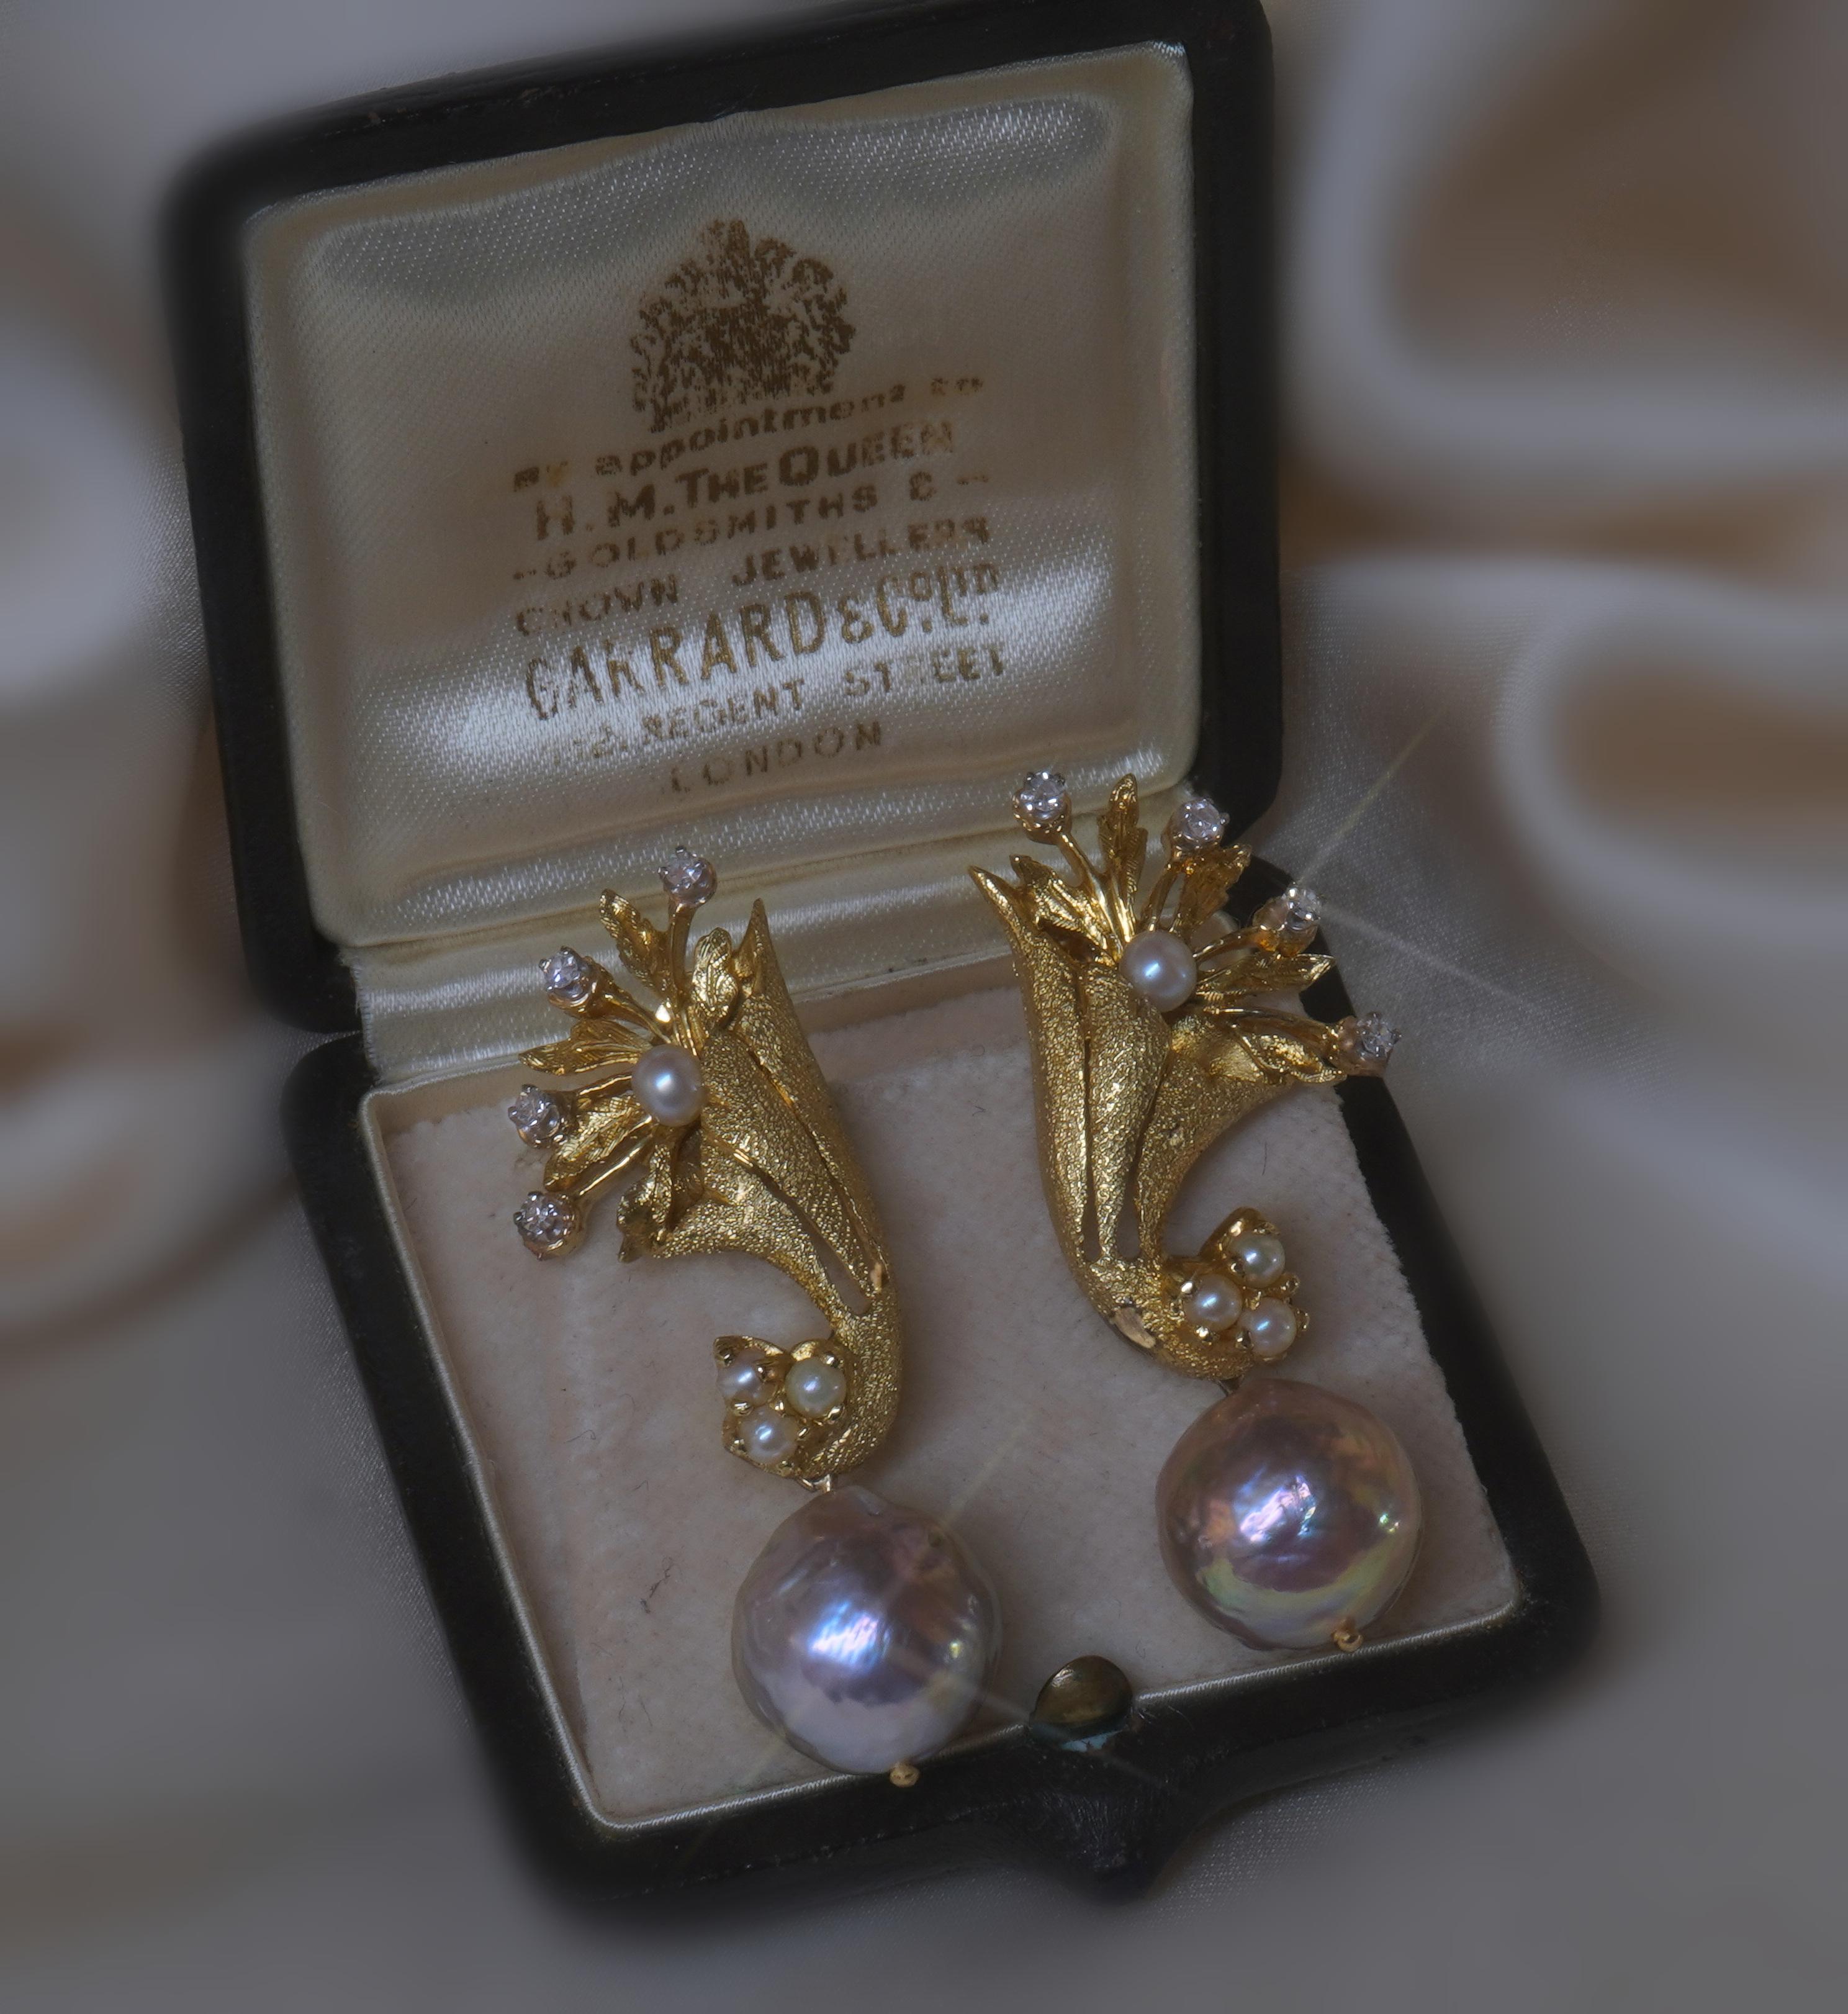 Old South Jewels proudly presents LUXURY.   GIA Certified GORGEOUS 14K GOLD PINK PEARL & DIAMOND EARRINGS AND BOX!   Huge Vintage Natural Saltwater Pearls and Bright Sparkling White Diamonds and Stunning!   Huge Pink Glowing Baroque Pearls Are 13 MM